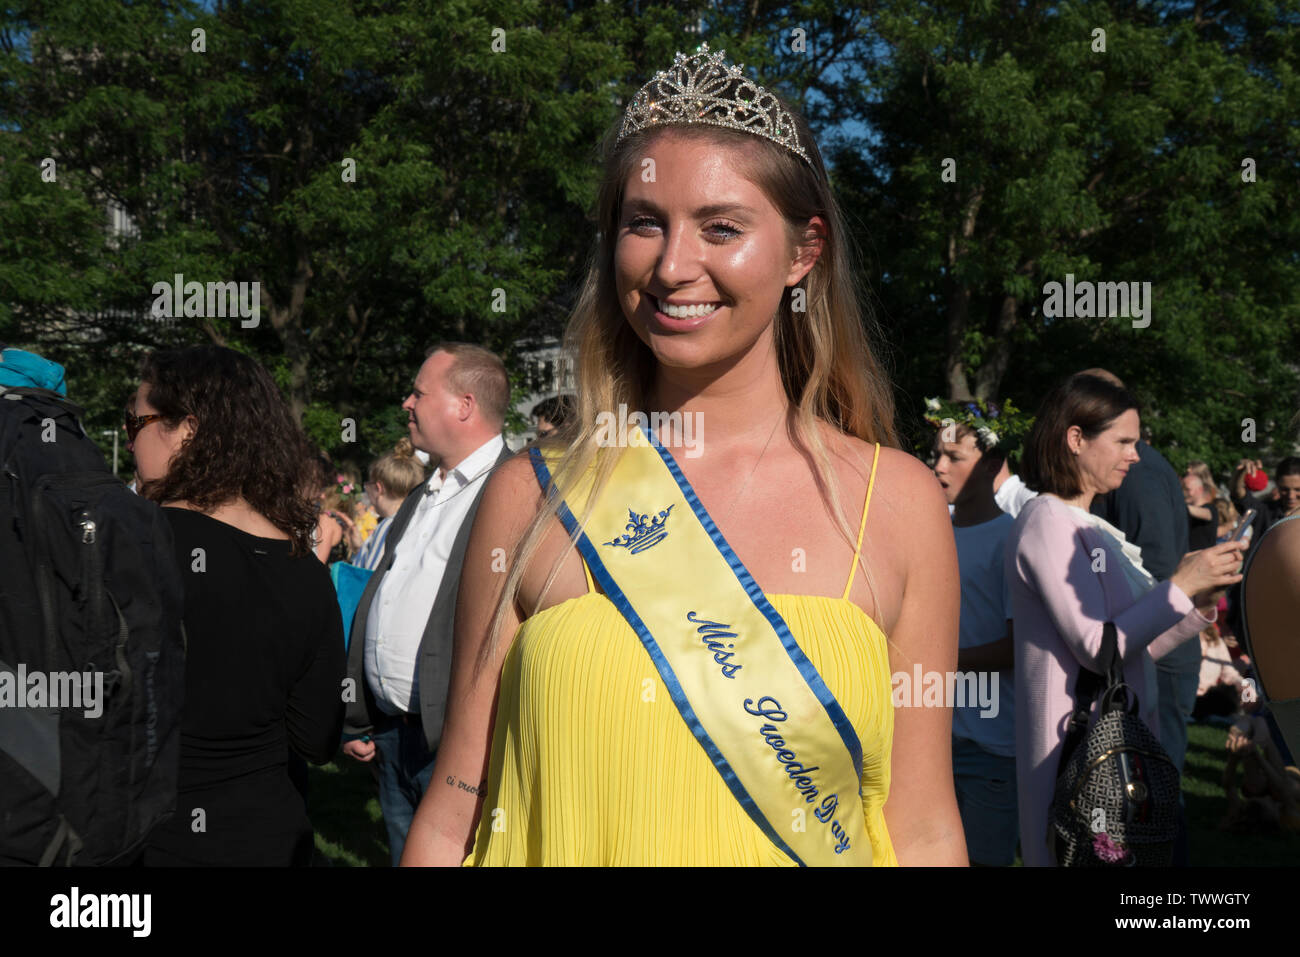 Miss Sweden Day 2019 at the Swedish Midsummer Festival, held annually in Battery Park City’s Wagner Park. Stock Photo